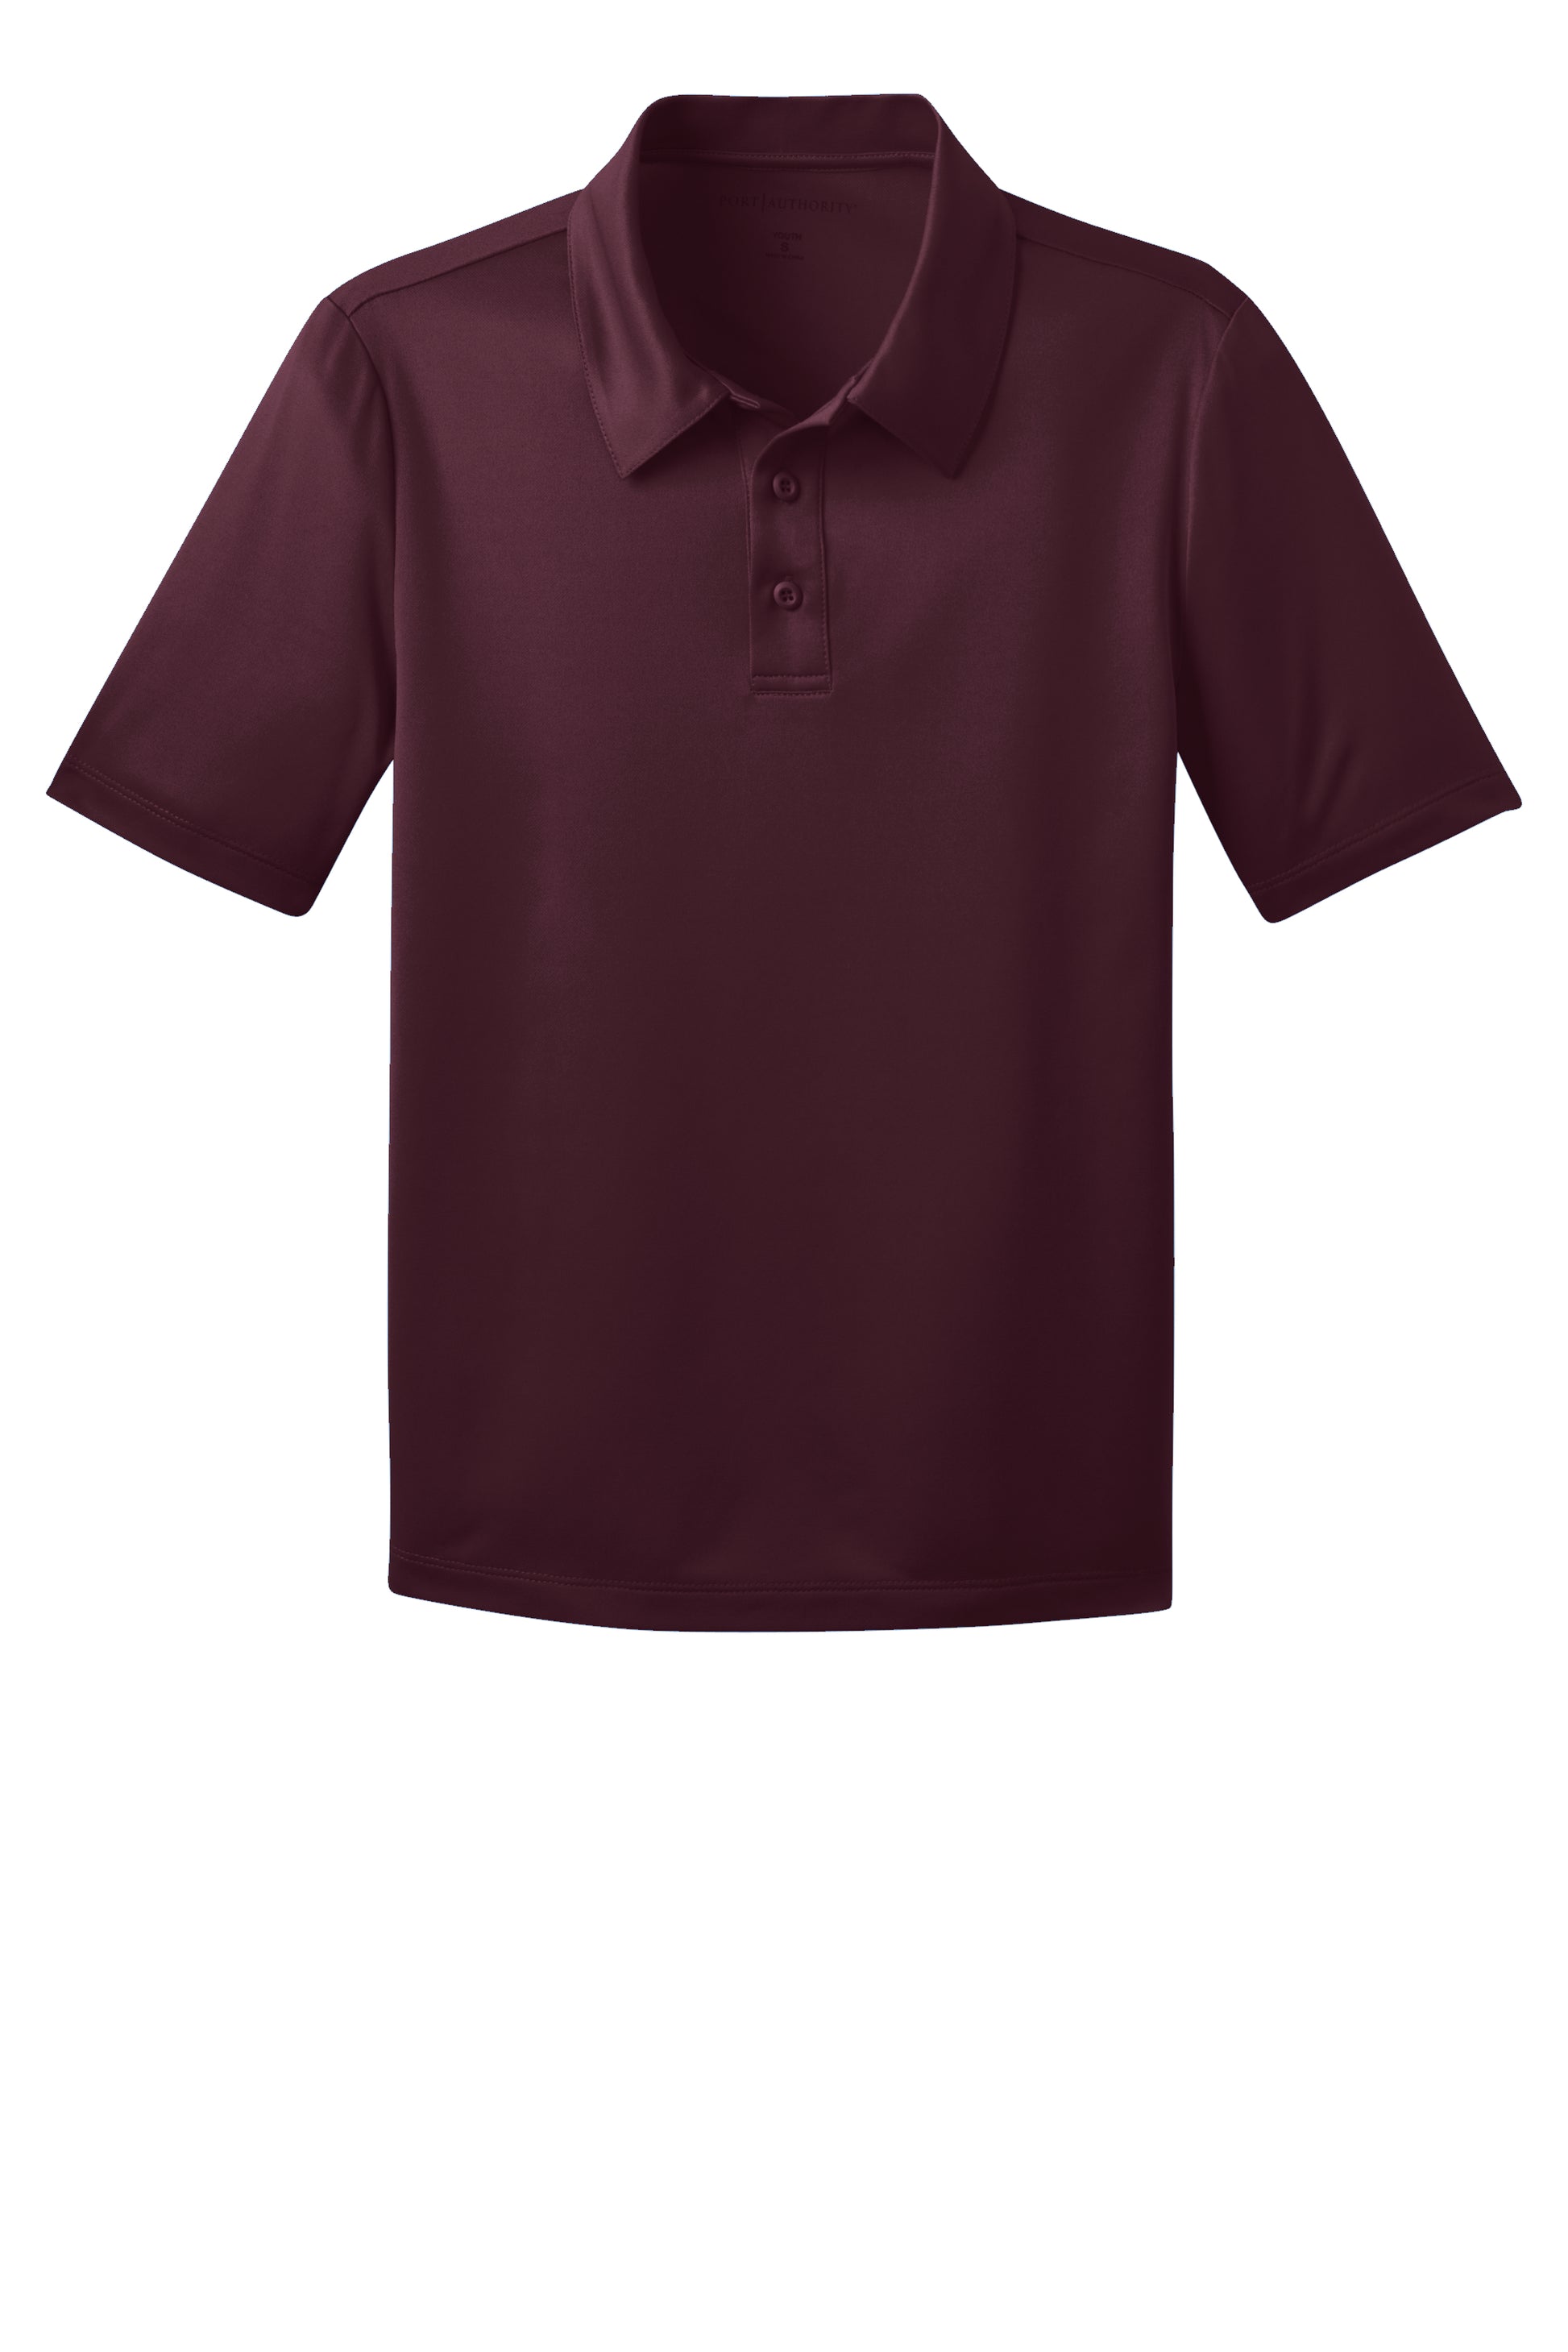 port authority youth silk touch performance polo maroon